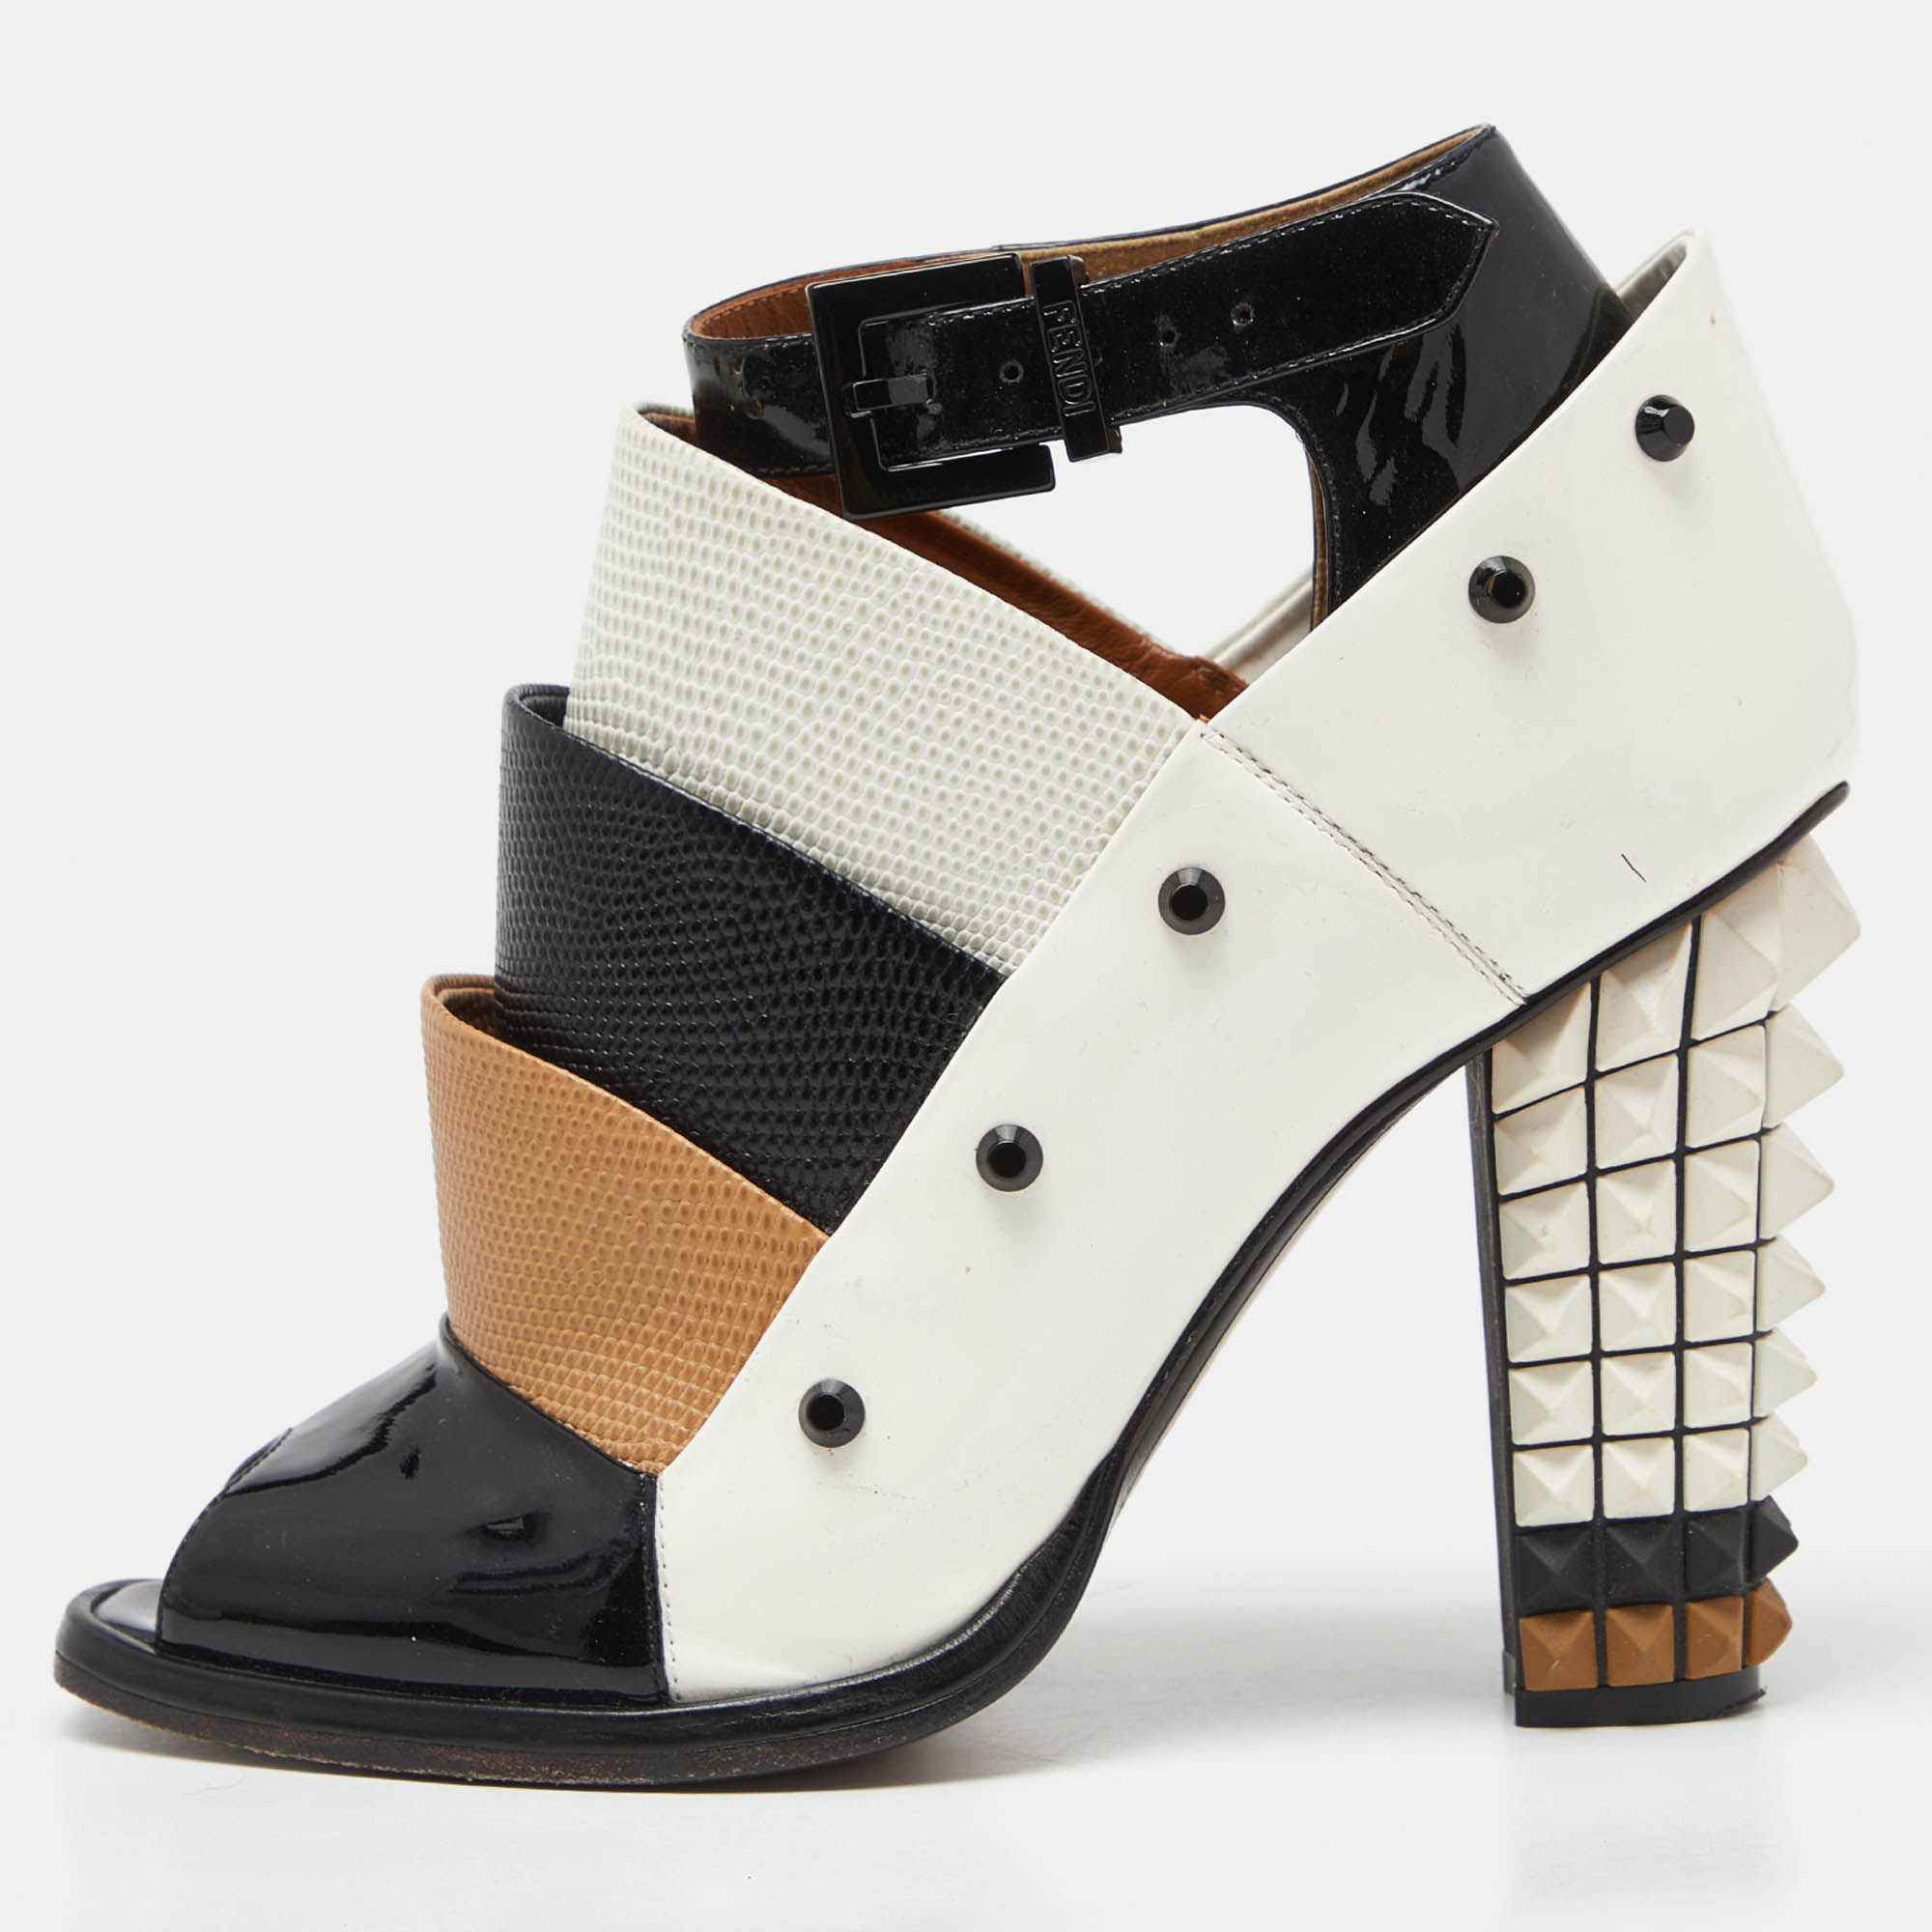 Fendi Multicolor Patent Leather and Embossed Lizard Studded Peep Toe Ankle Strap Booties Size 37.5